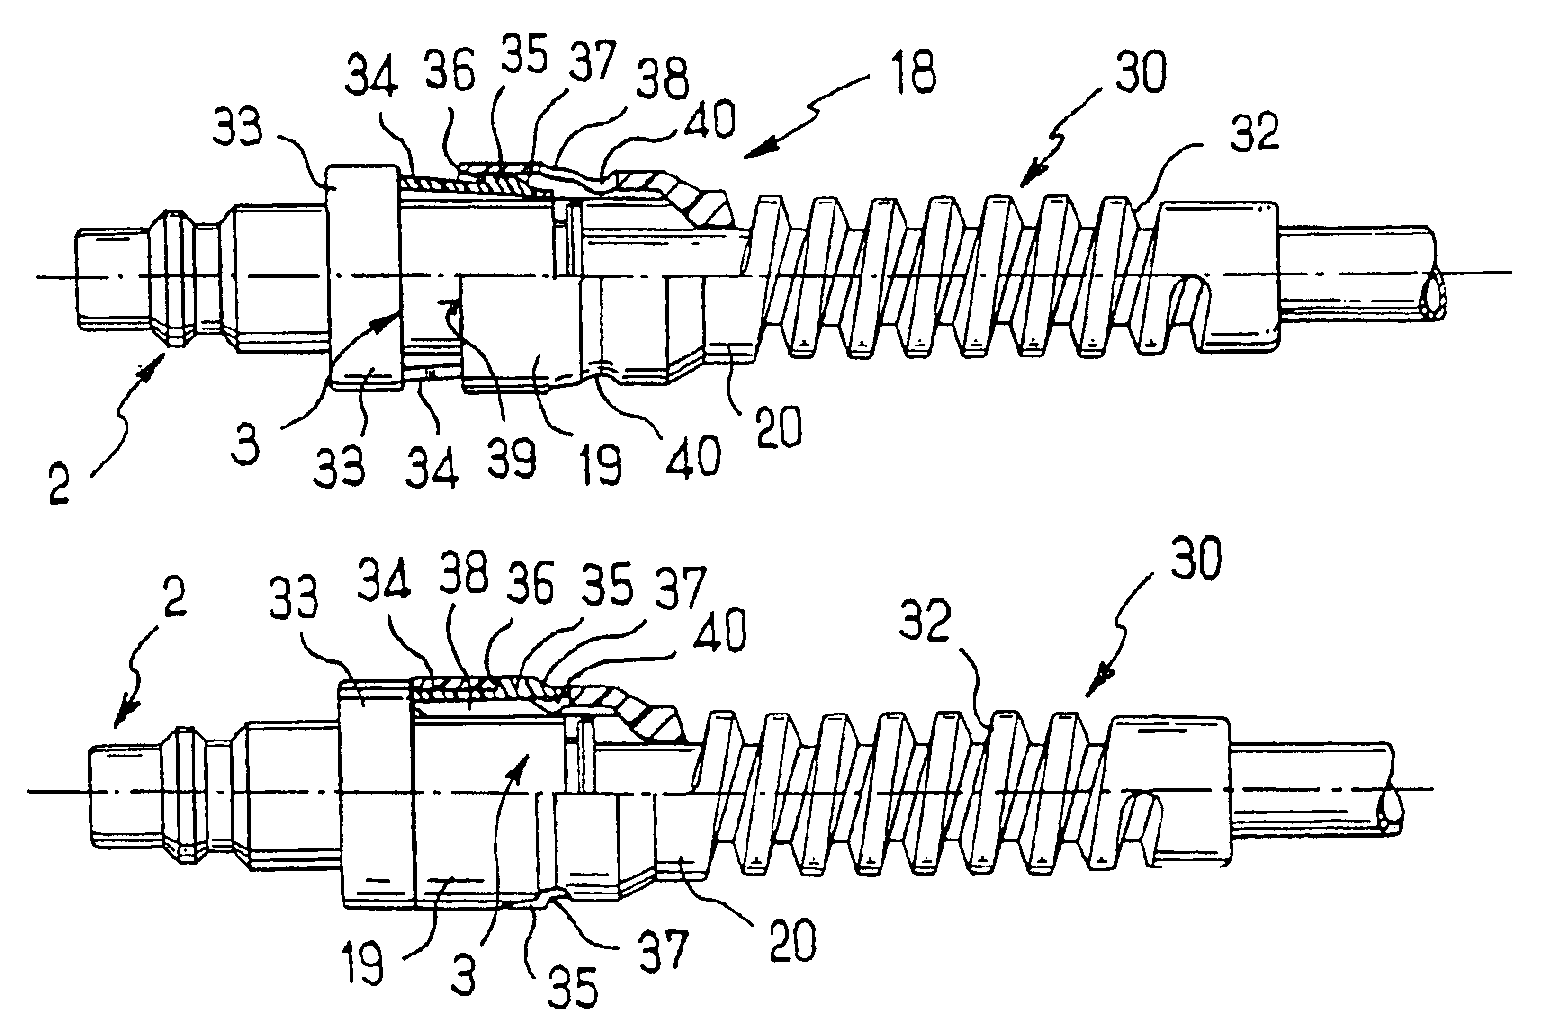 Connecting device comprising means for instantaneous connection of a pipe end to a member and means for protecting the connection